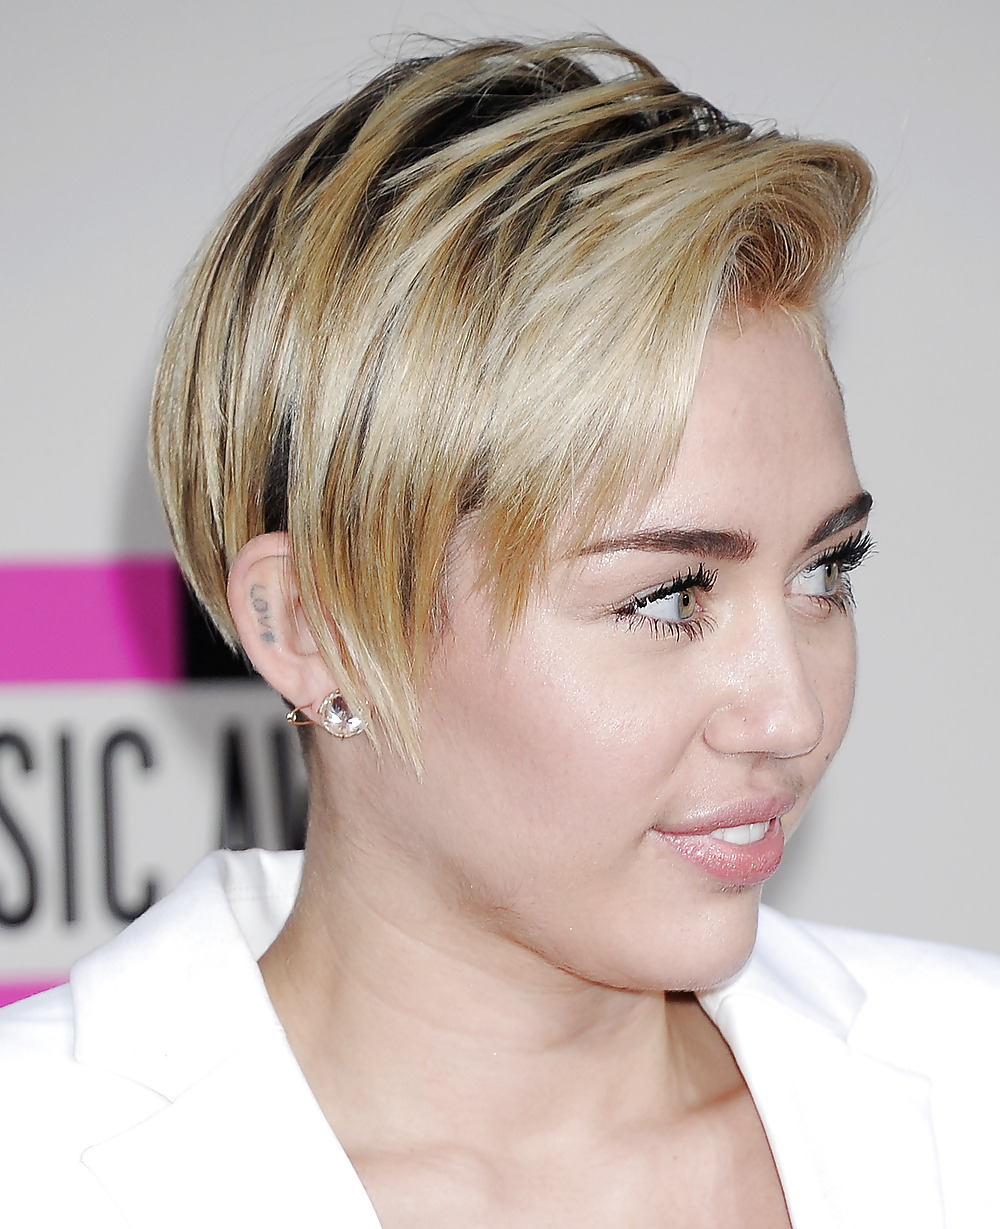 Miley cyrus sexy 2013 American Music Awards
 #36323566